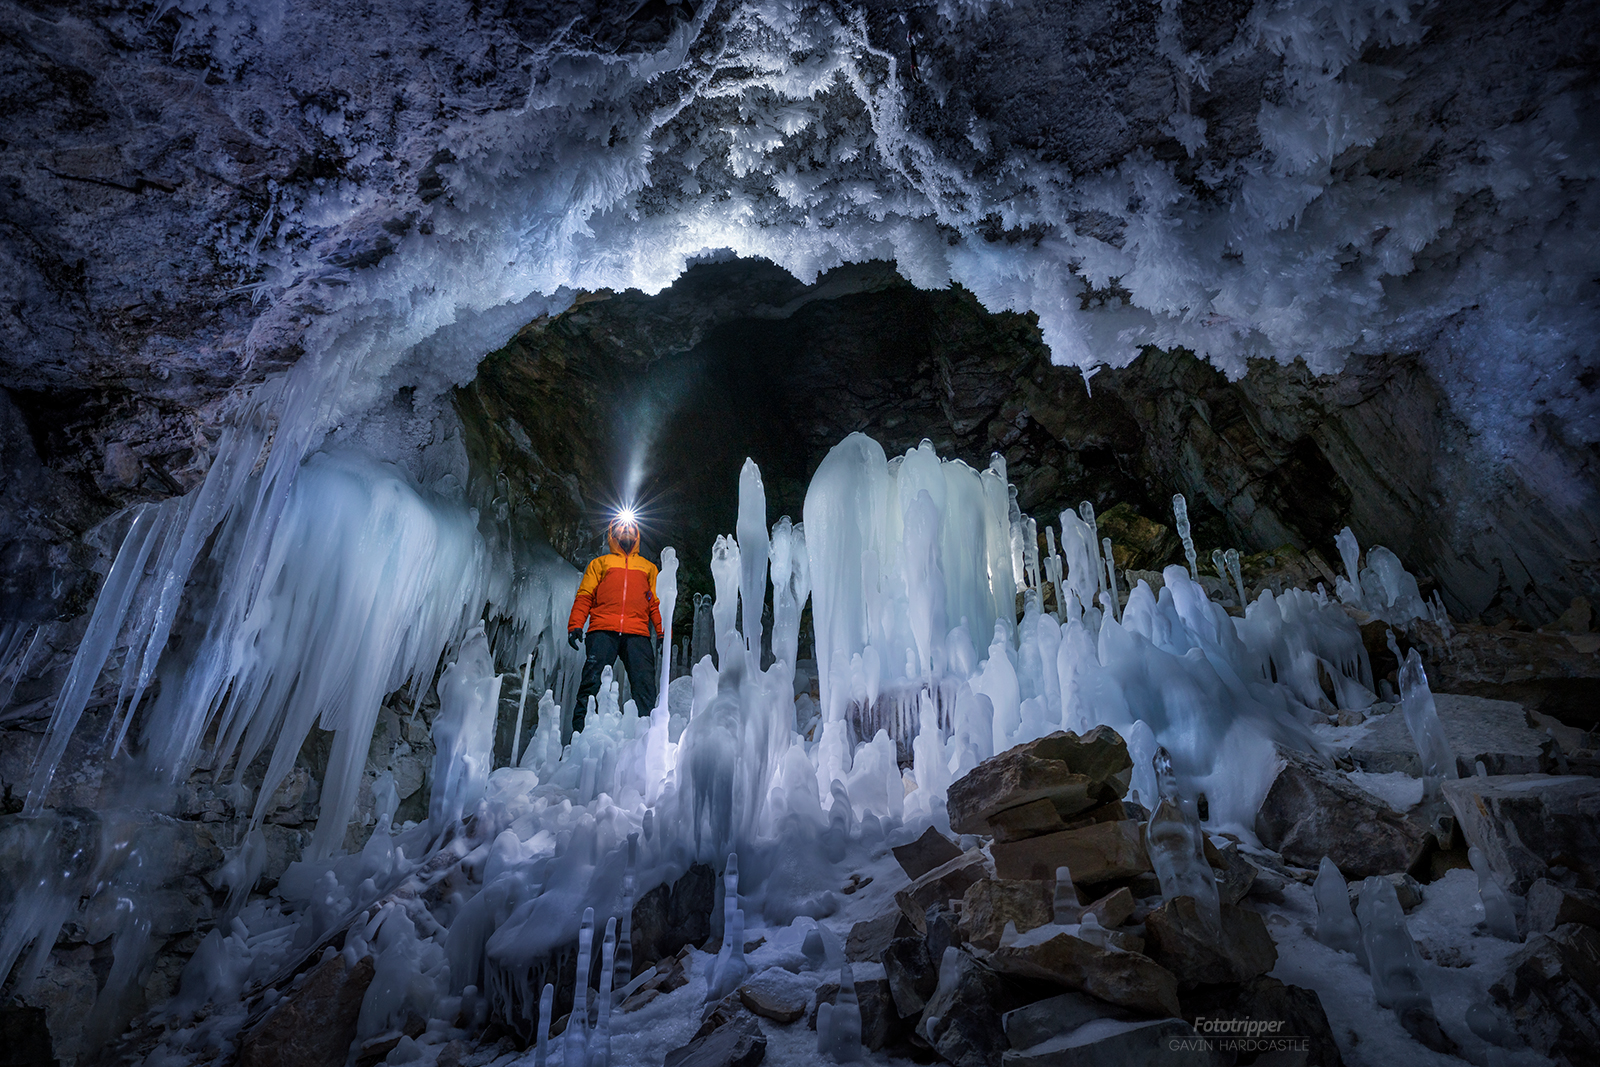 The light in the dark, ice cave